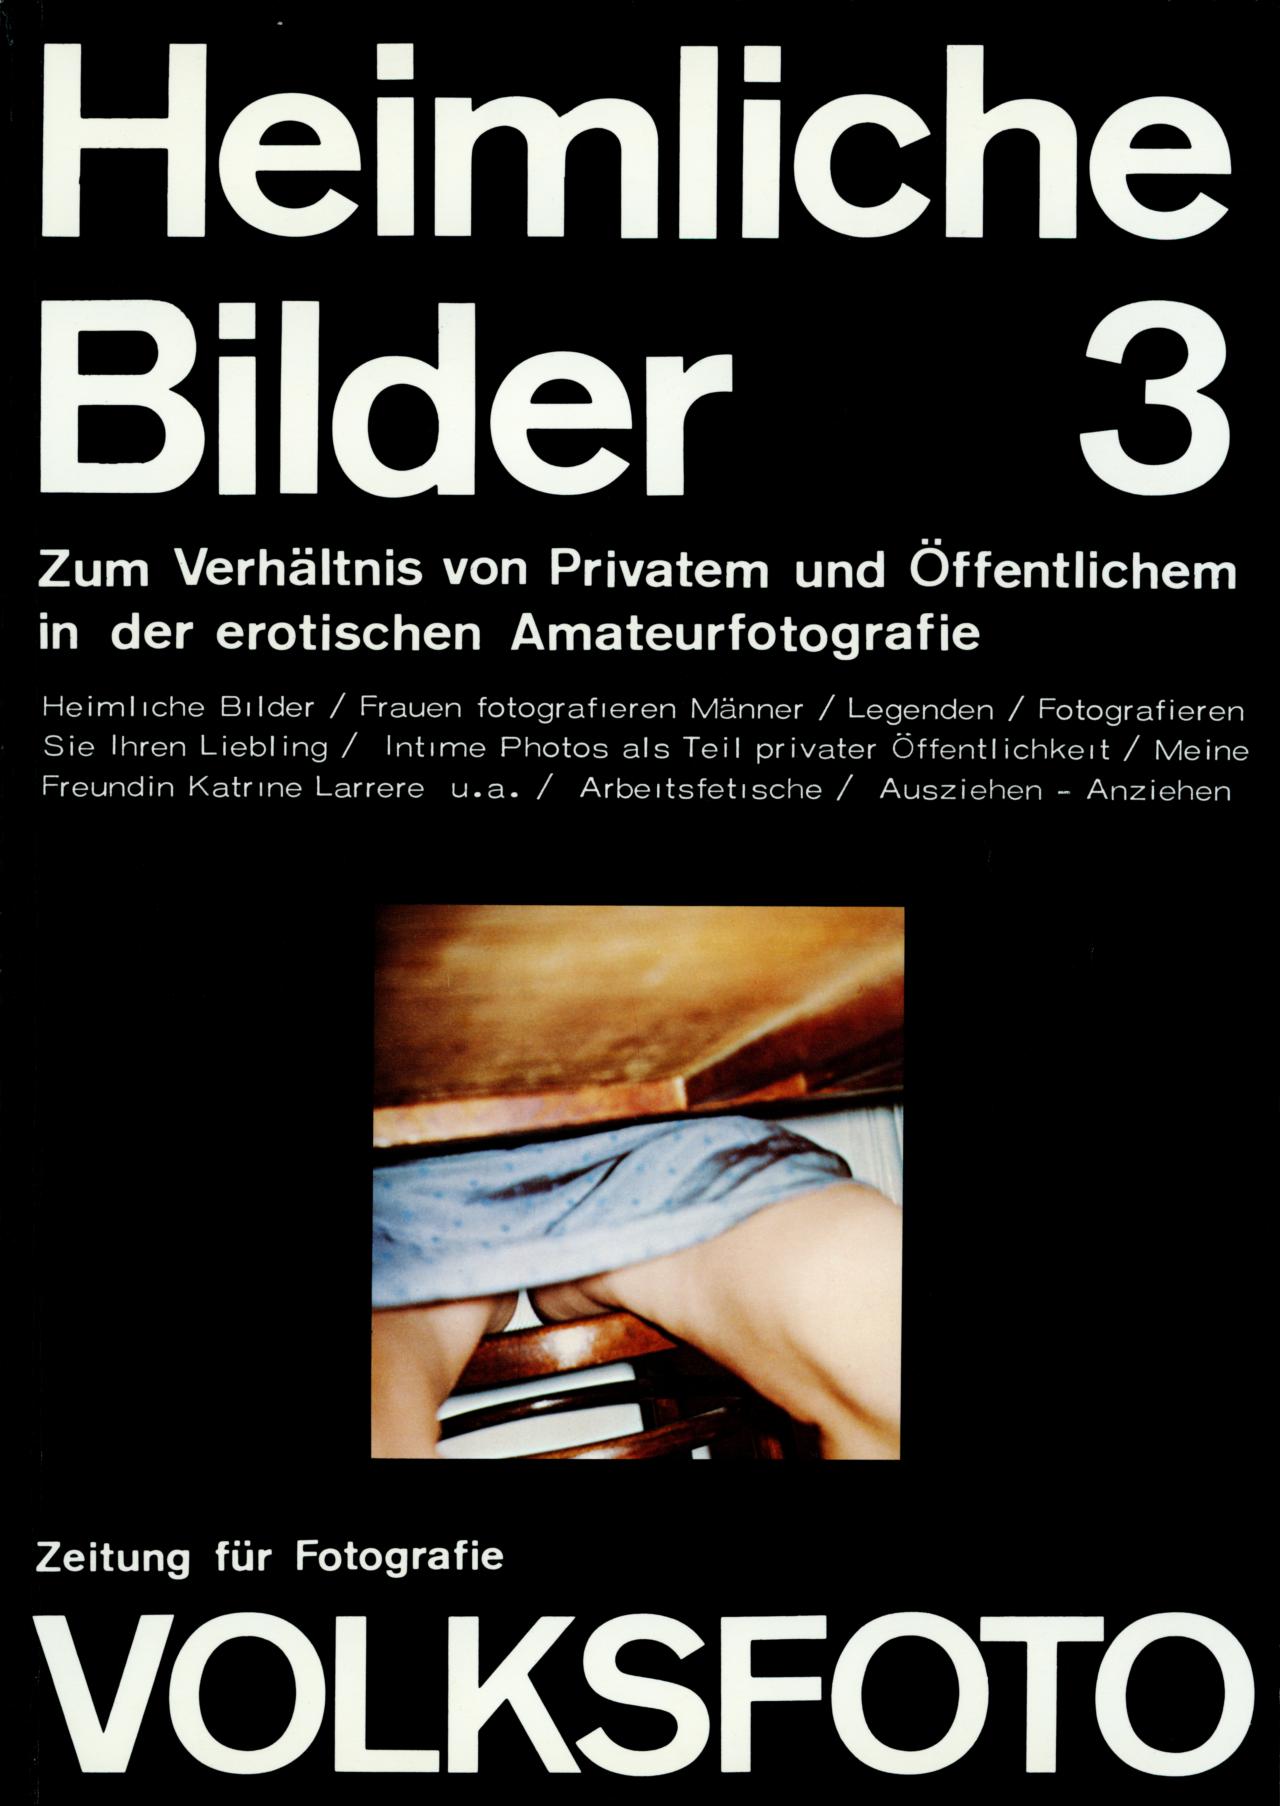 Dieter Hacker and Andreas Seltzer (ed.), folk photo. Newspaper for photography. Secret pictures. On the Relationship between Private and Public in Erotic Amateur Photography, No. 3, 7th Produzentengalerie, Berlin, 1977